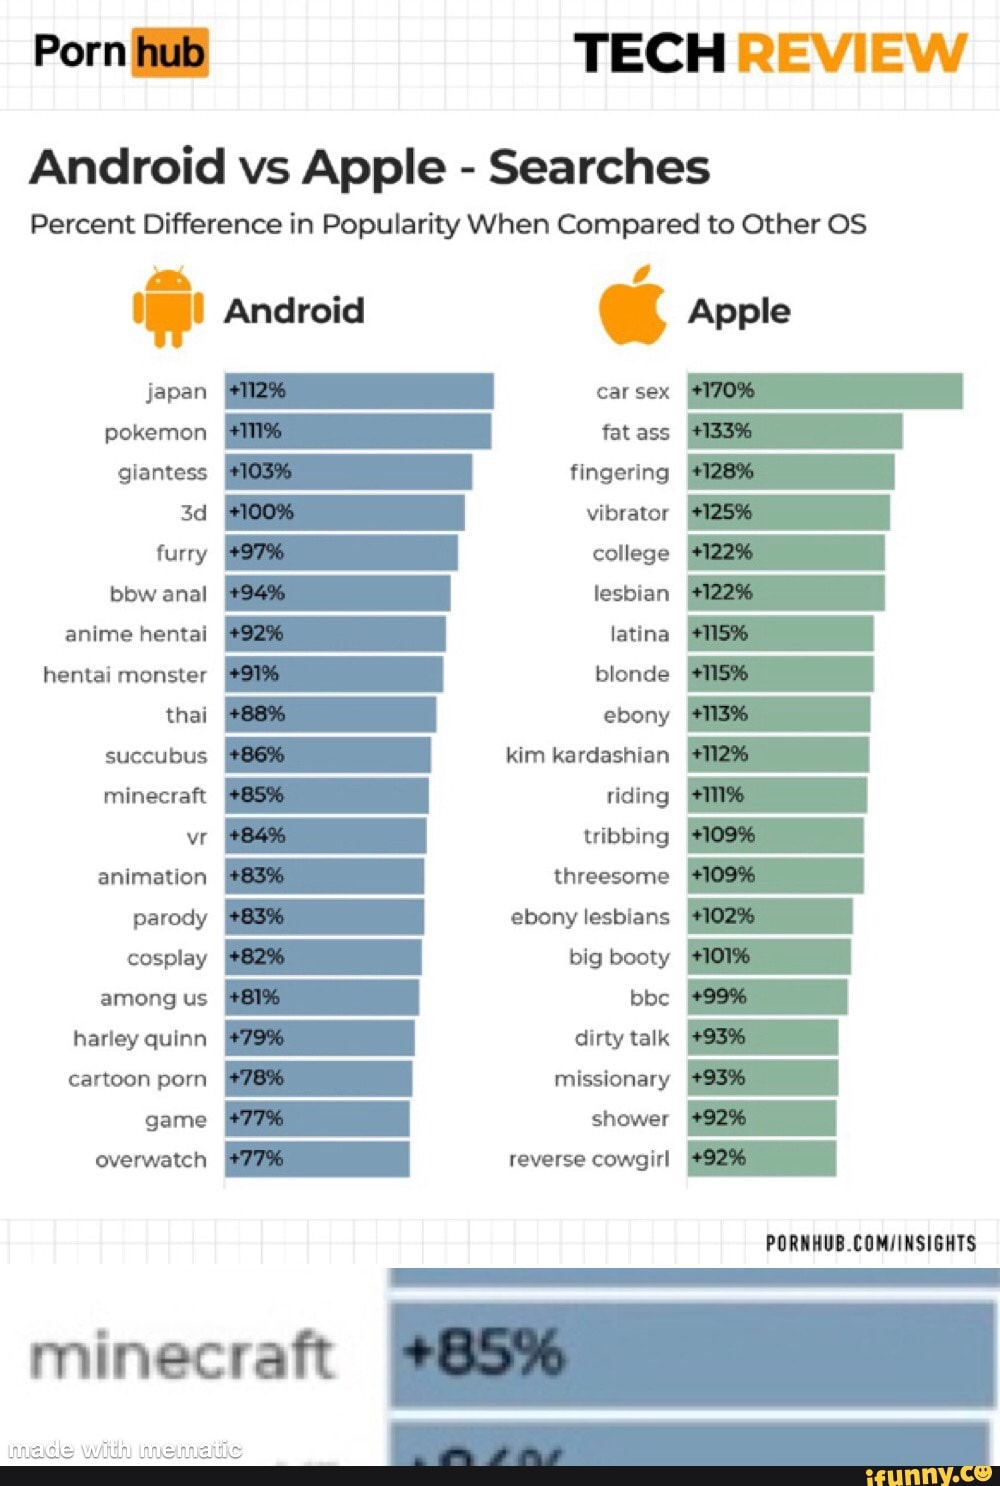 Talking Cartoon Lesbian Porn Games - Porn hub TECH REVIEW Android vs Apple - Searches Percent Difference in  Popularity When Compared to Other